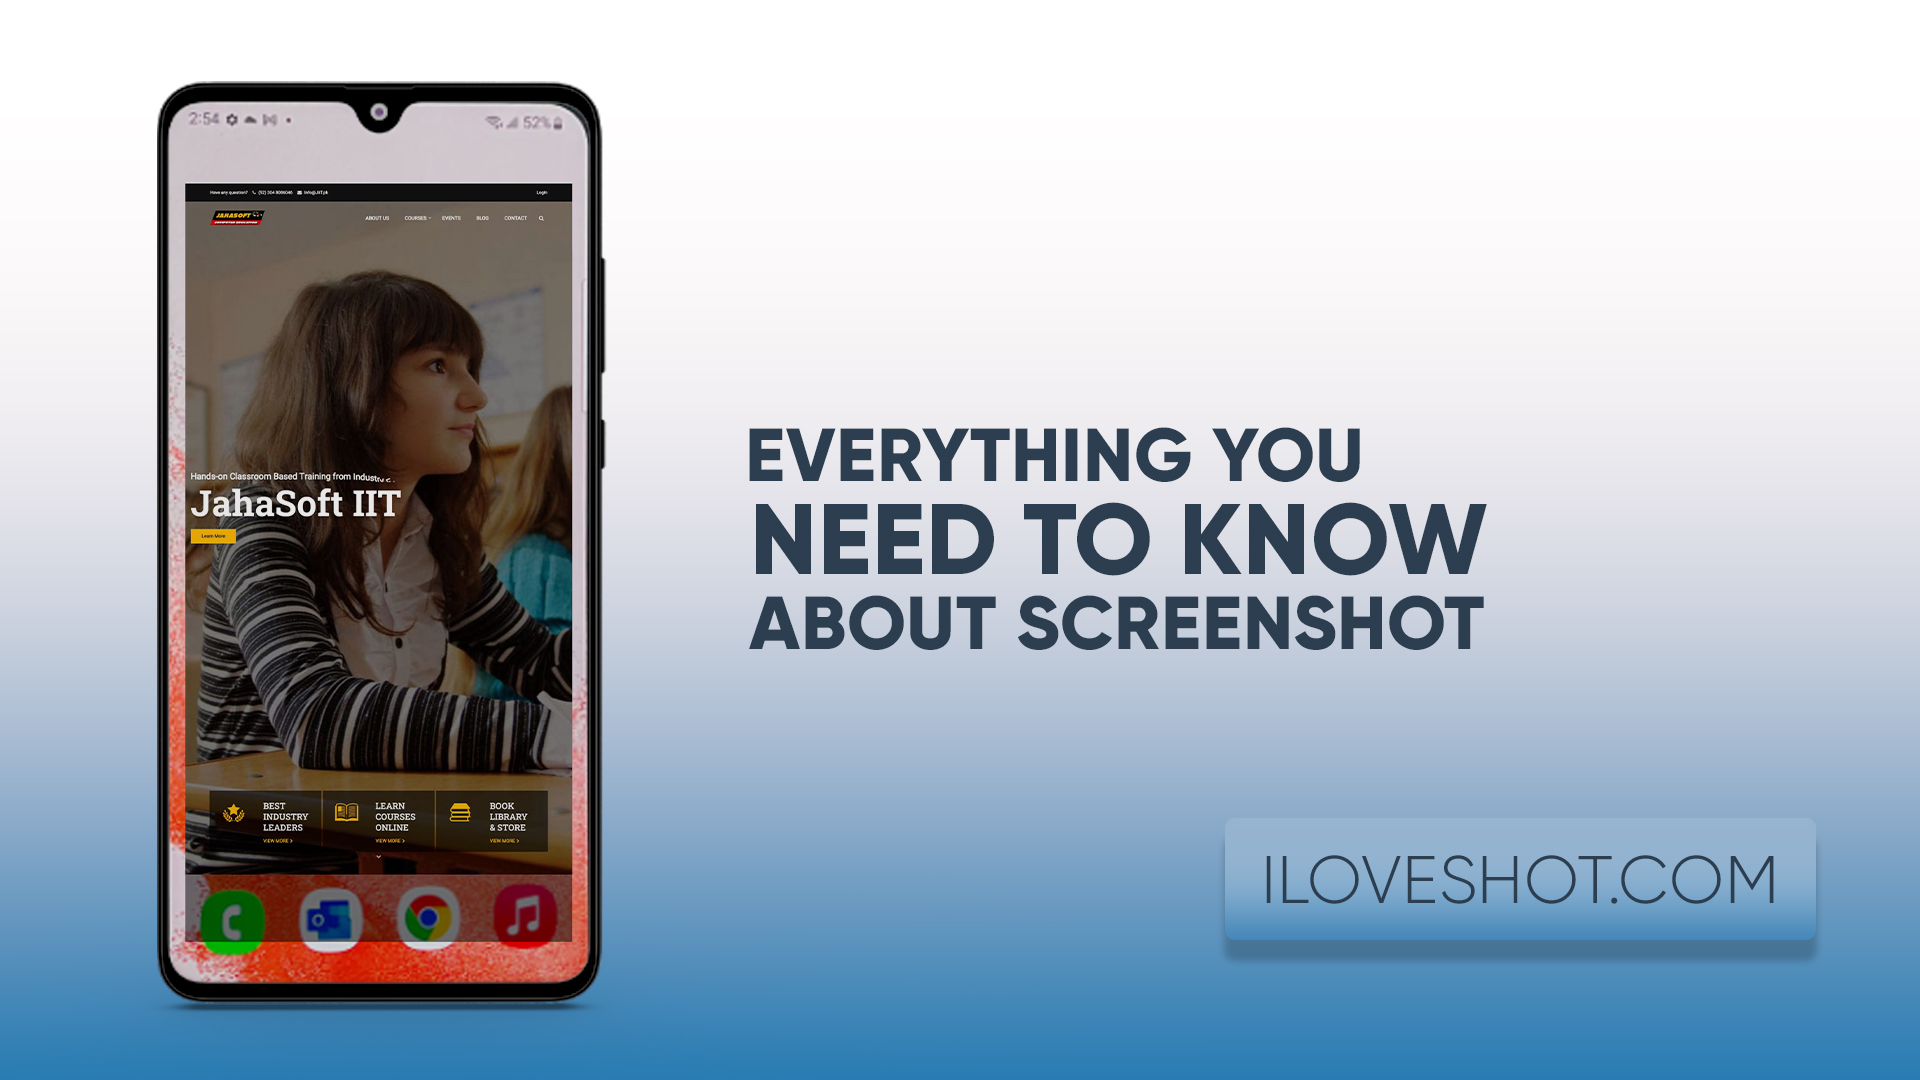 EVERYTHING YOU NEED TO KNOW ABOUT SCREENSHOT